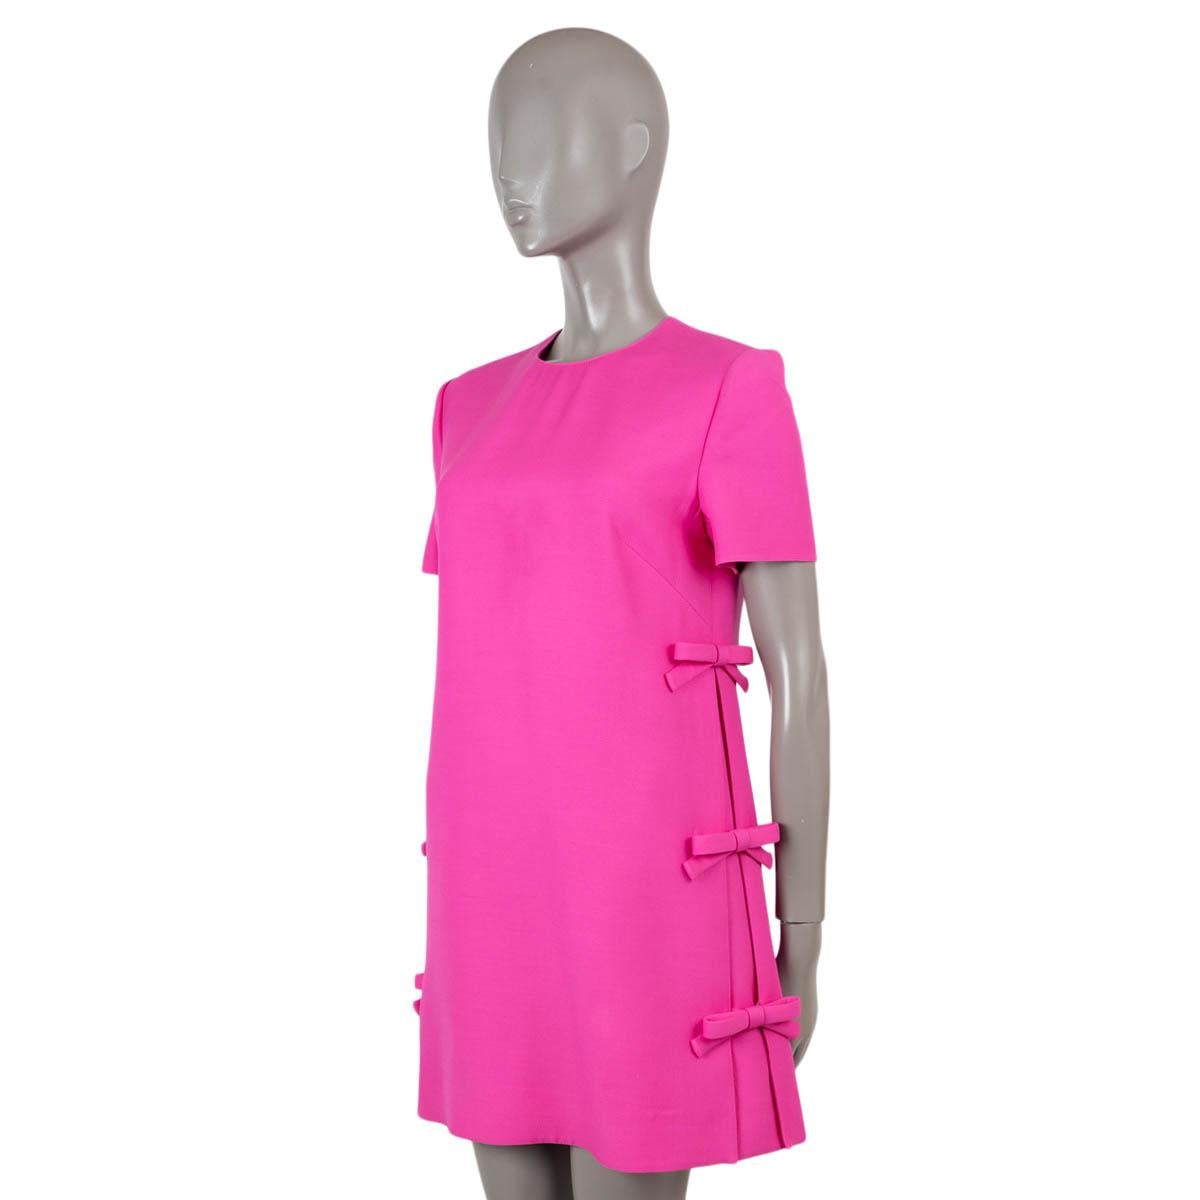 100% authentic Valentino mini dress in hot pink crepe wool (65%) and silk (35%). Features a crewneck, short sleeves and bow embellished side pleats. Opens with hook and concealed zipper in the back and is lined in viscose (with 9% elastane). Has